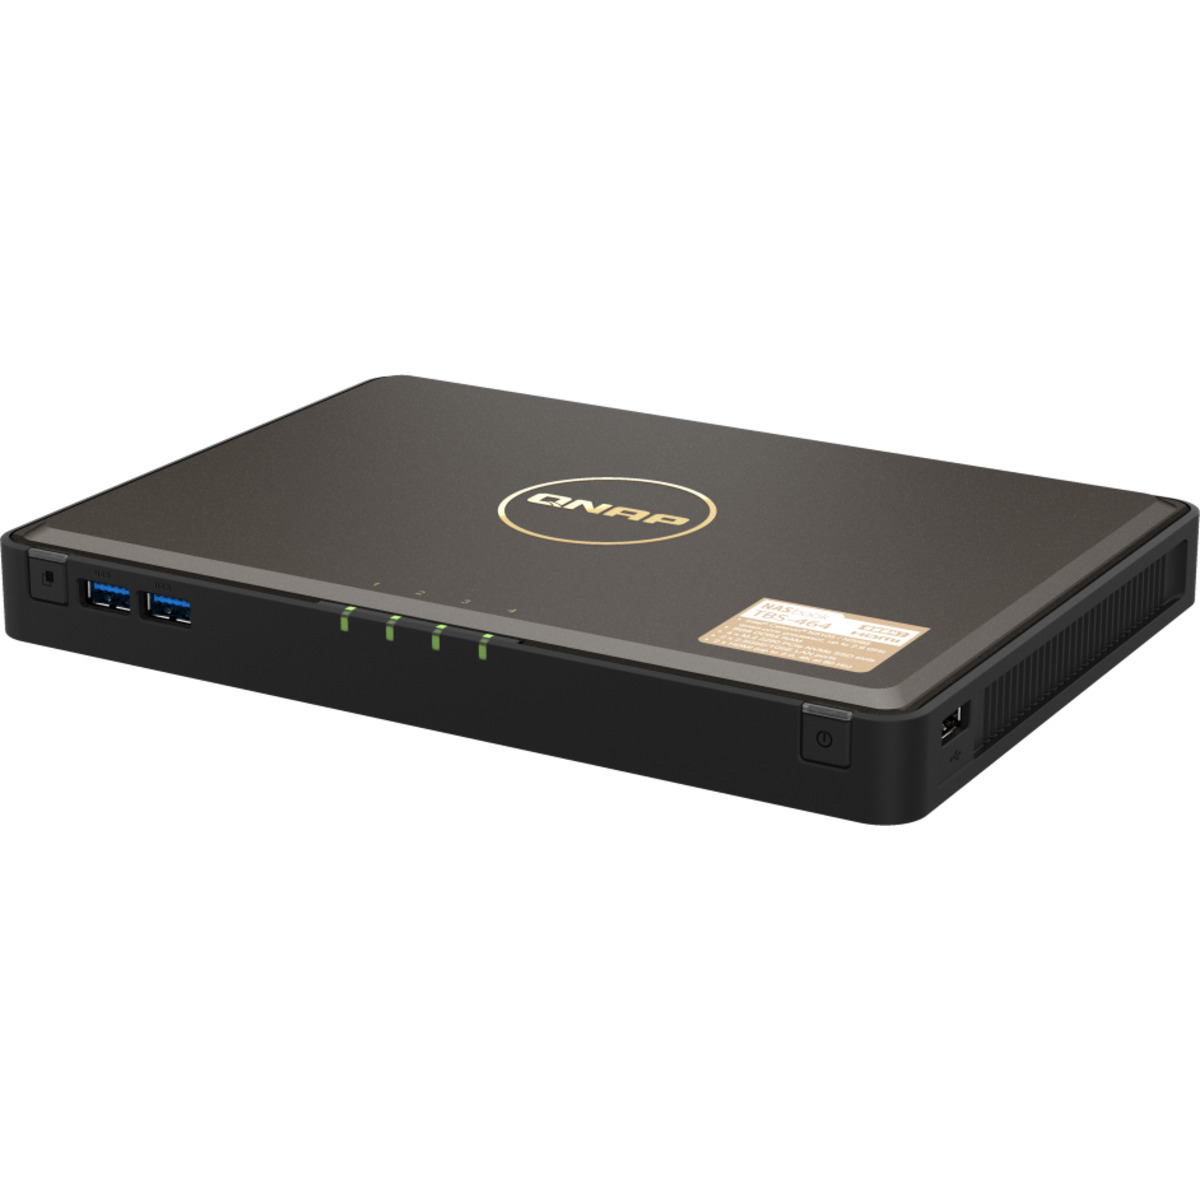 QNAP TBS-464 4tb 4-Bay Desktop Multimedia / Power User / Business NAS - Network Attached Storage Device 4x1tb Crucial P3 Plus CT1000P3PSSD8  5000/3600MB/s M.2 2280 NVMe SSD CONSUMER Class Drives Installed - Burn-In Tested TBS-464